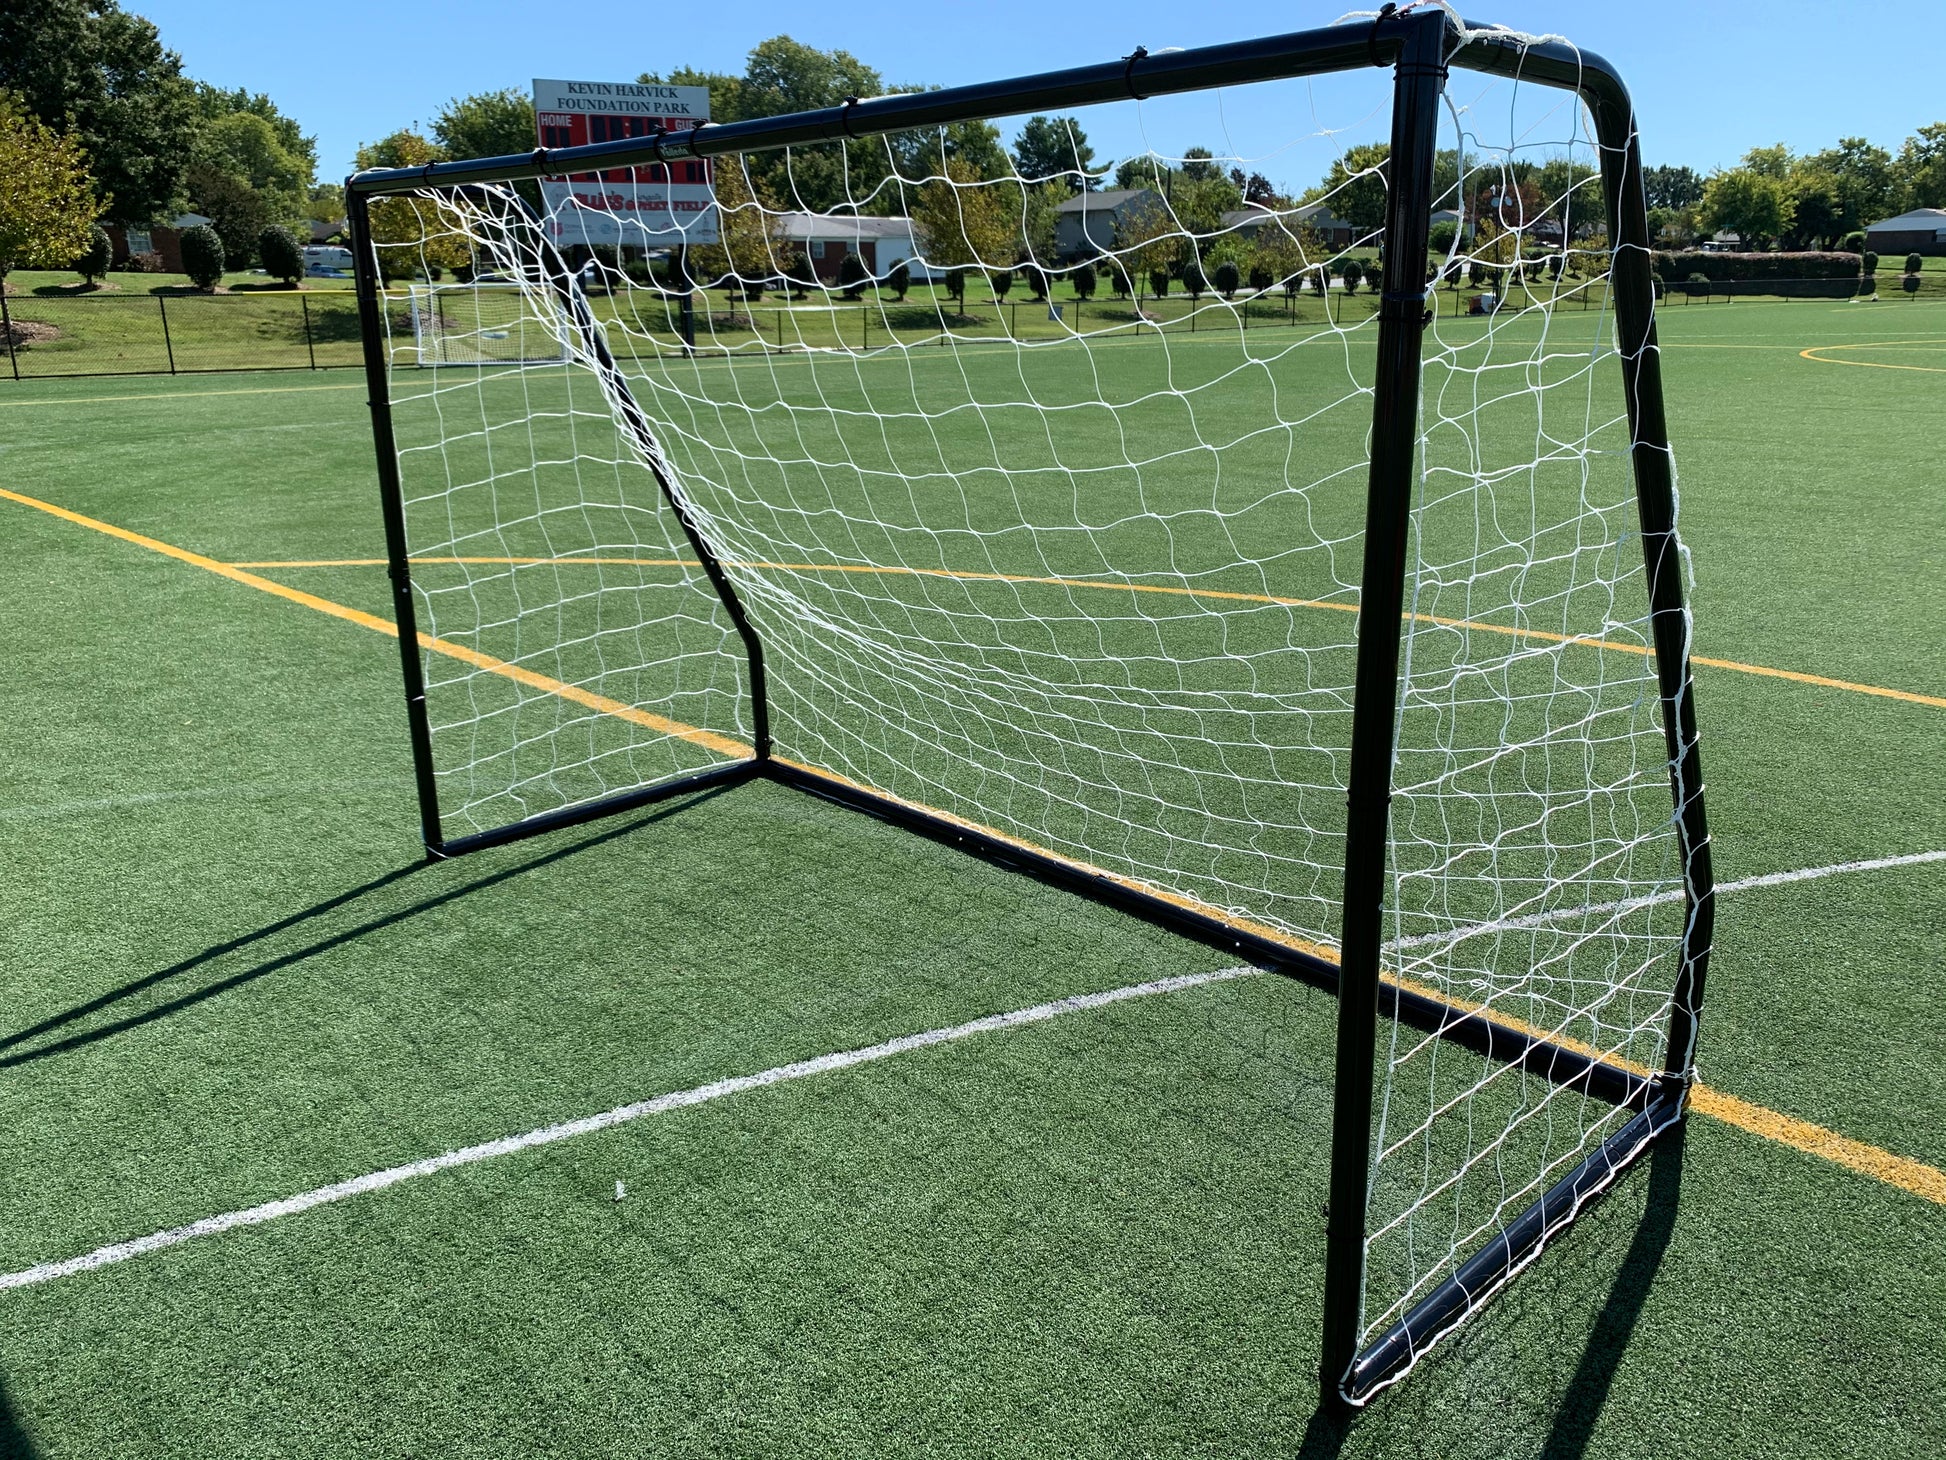 6ft Football Goal with Training Net